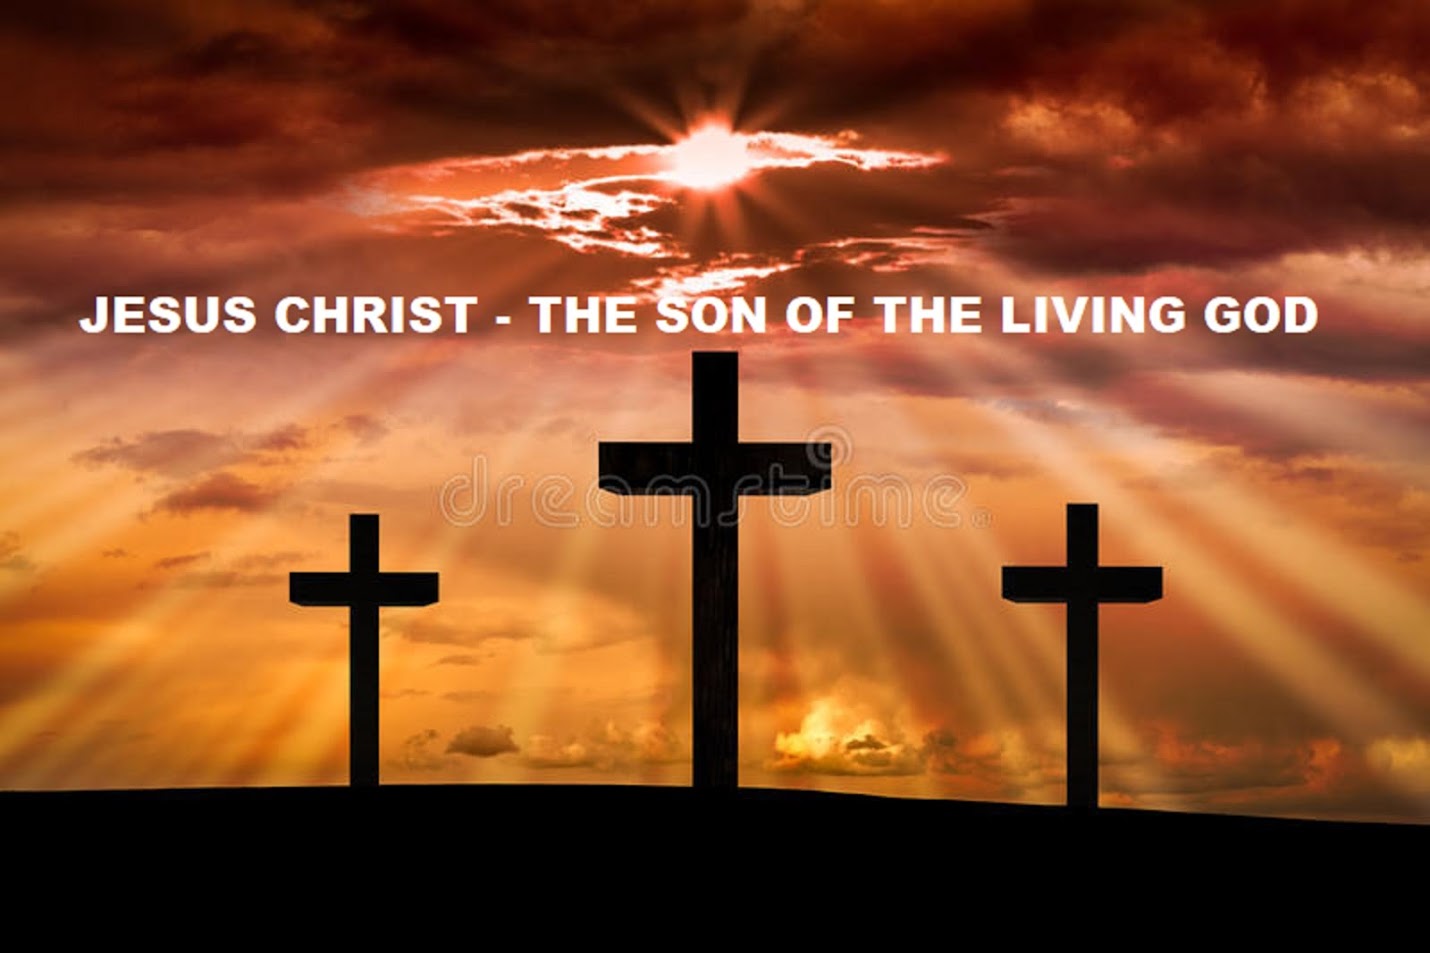 JESUS CHRIST - THE SON OF THE LIVING GOD